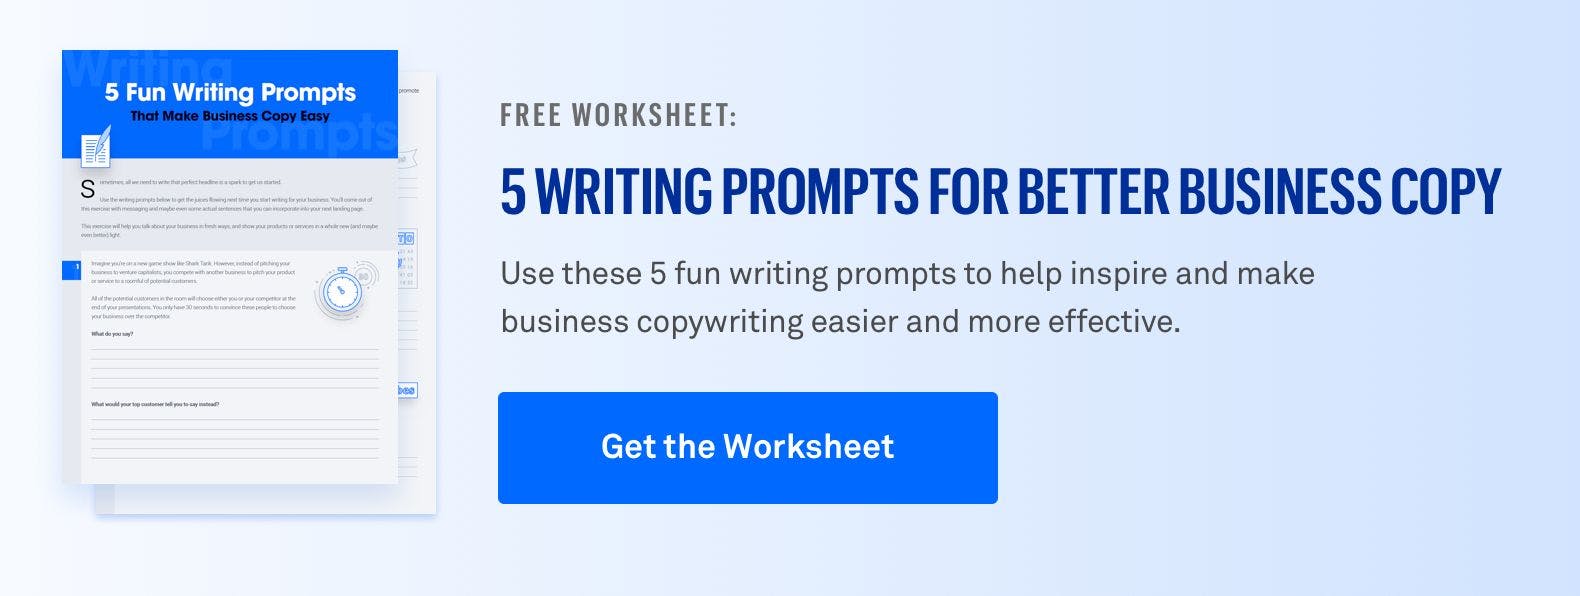 Get the 5 Fun Writing Prompts Worksheet